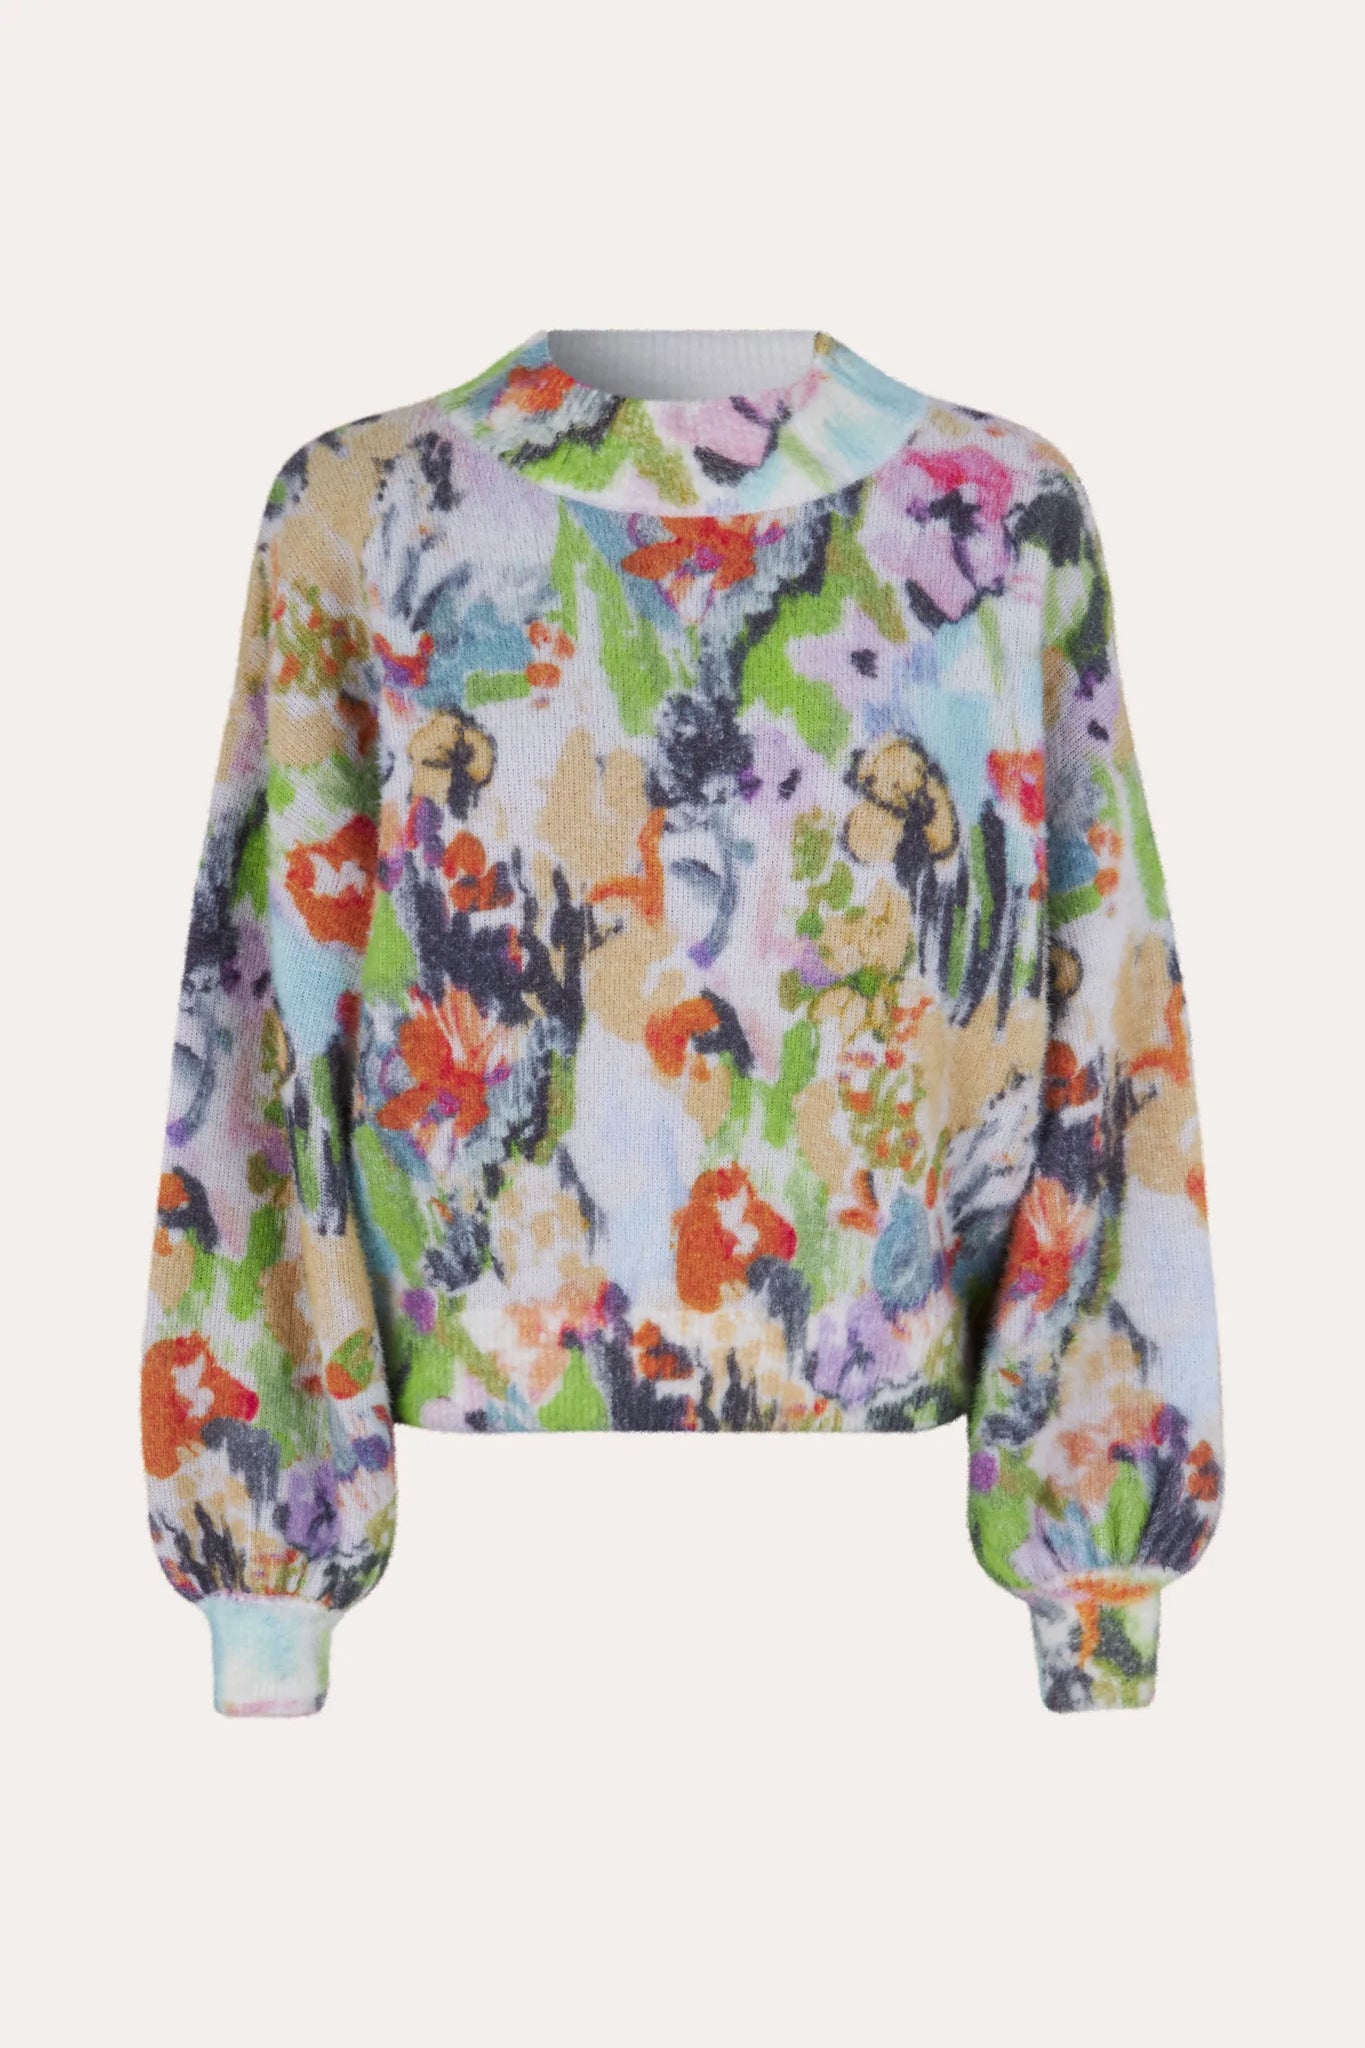 Stine Goya Adonis Sweater - Abstract Floral